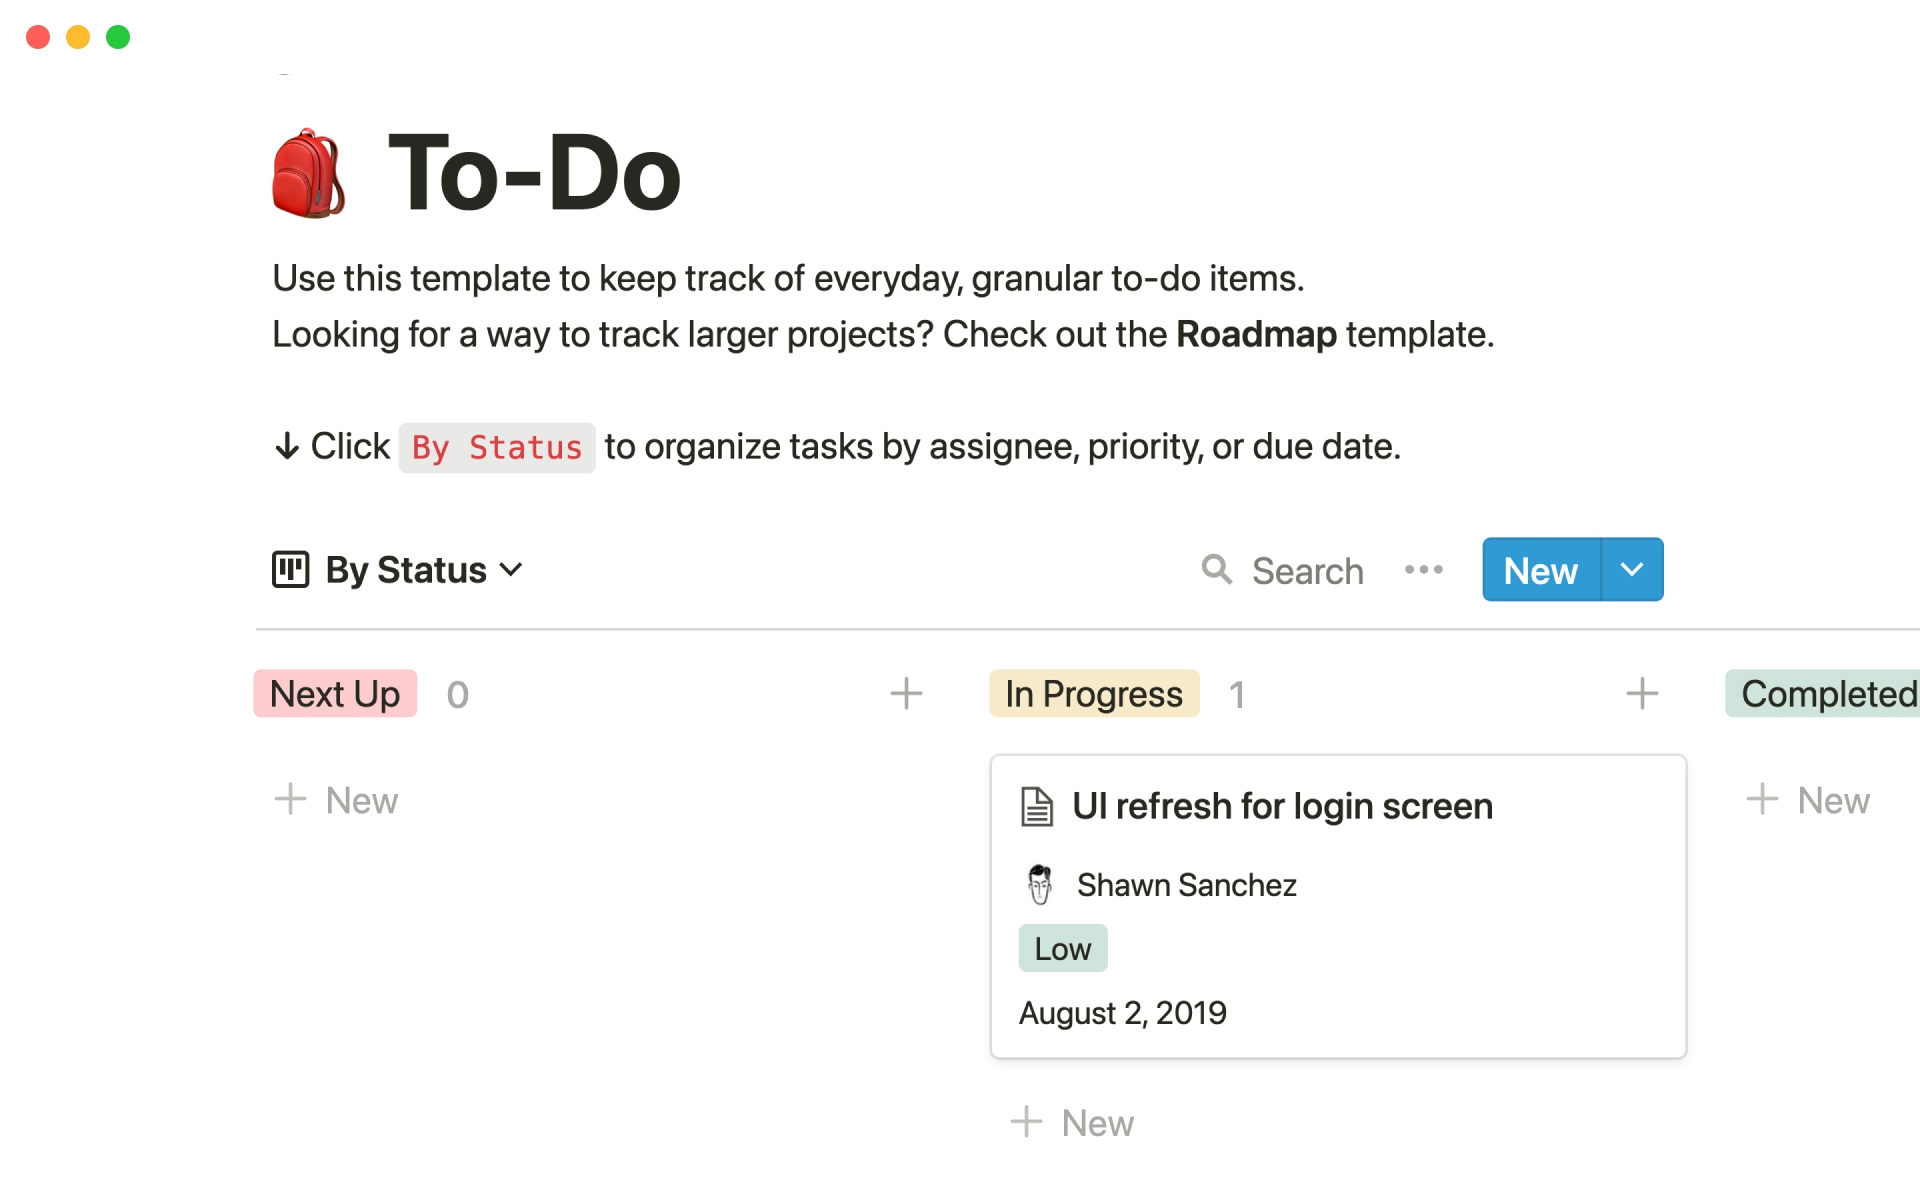 The desktop image for the to-do template